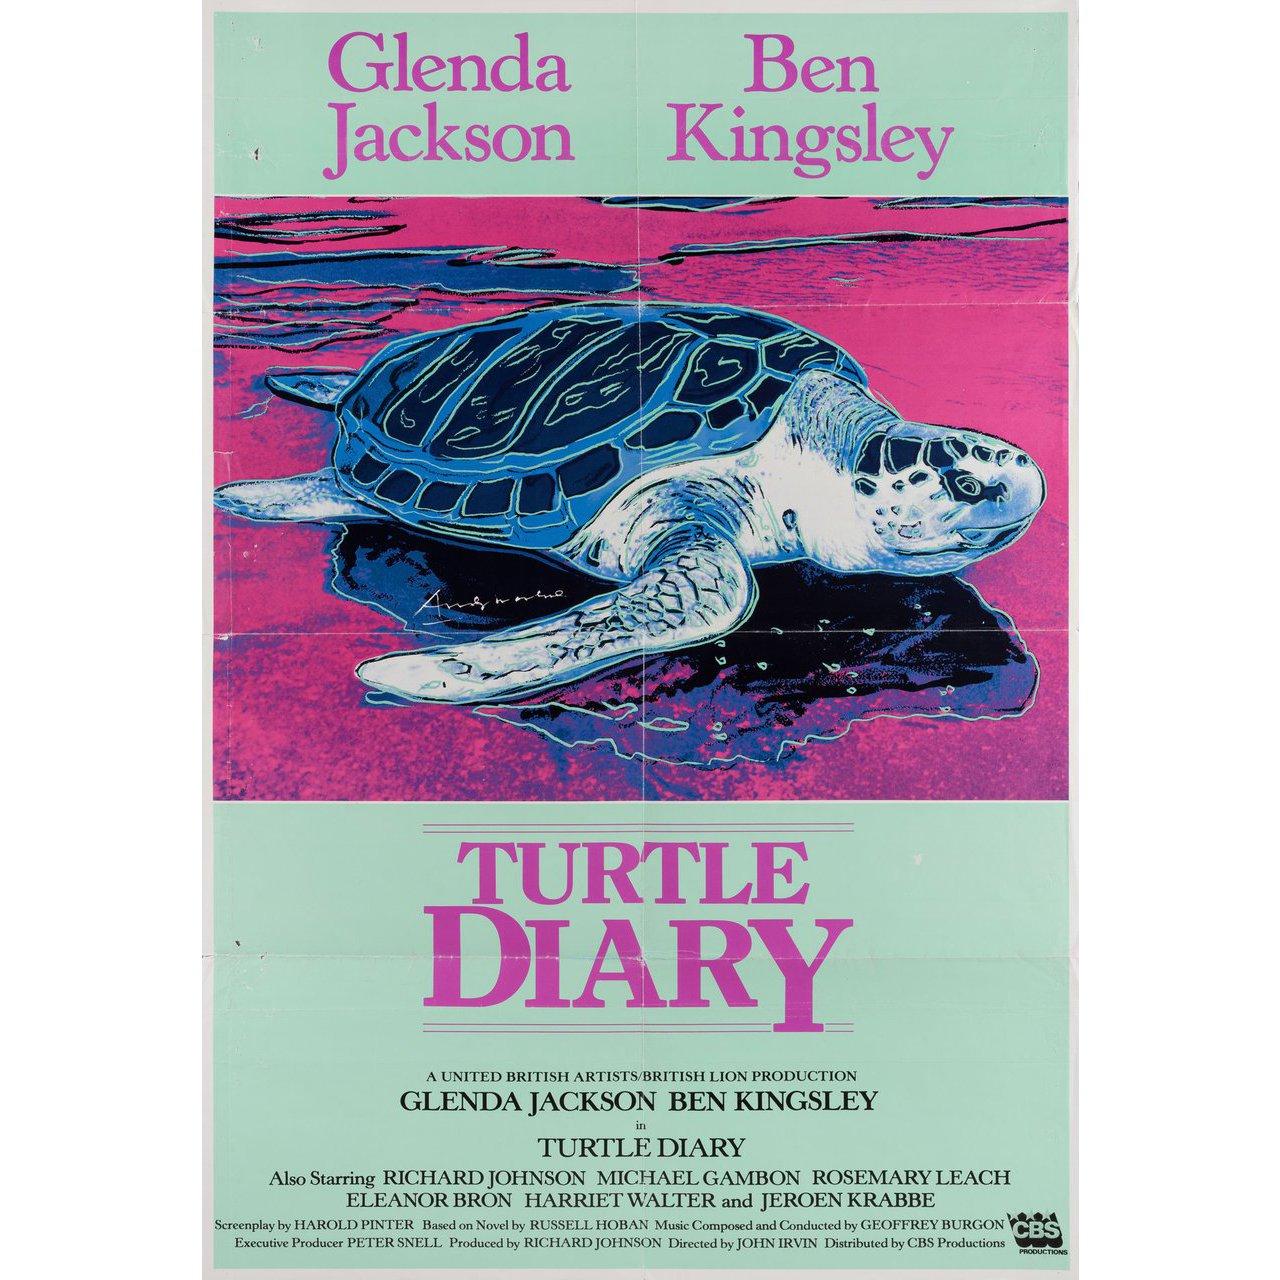 Original 1985 British one sheet poster by Andy Warhol for the film Turtle Diary directed by John Irvin with Glenda Jackson / Ben Kingsley / Richard Johnson / Michael Gambon. Good-Very Good condition, folded with pinholes. Many original posters were